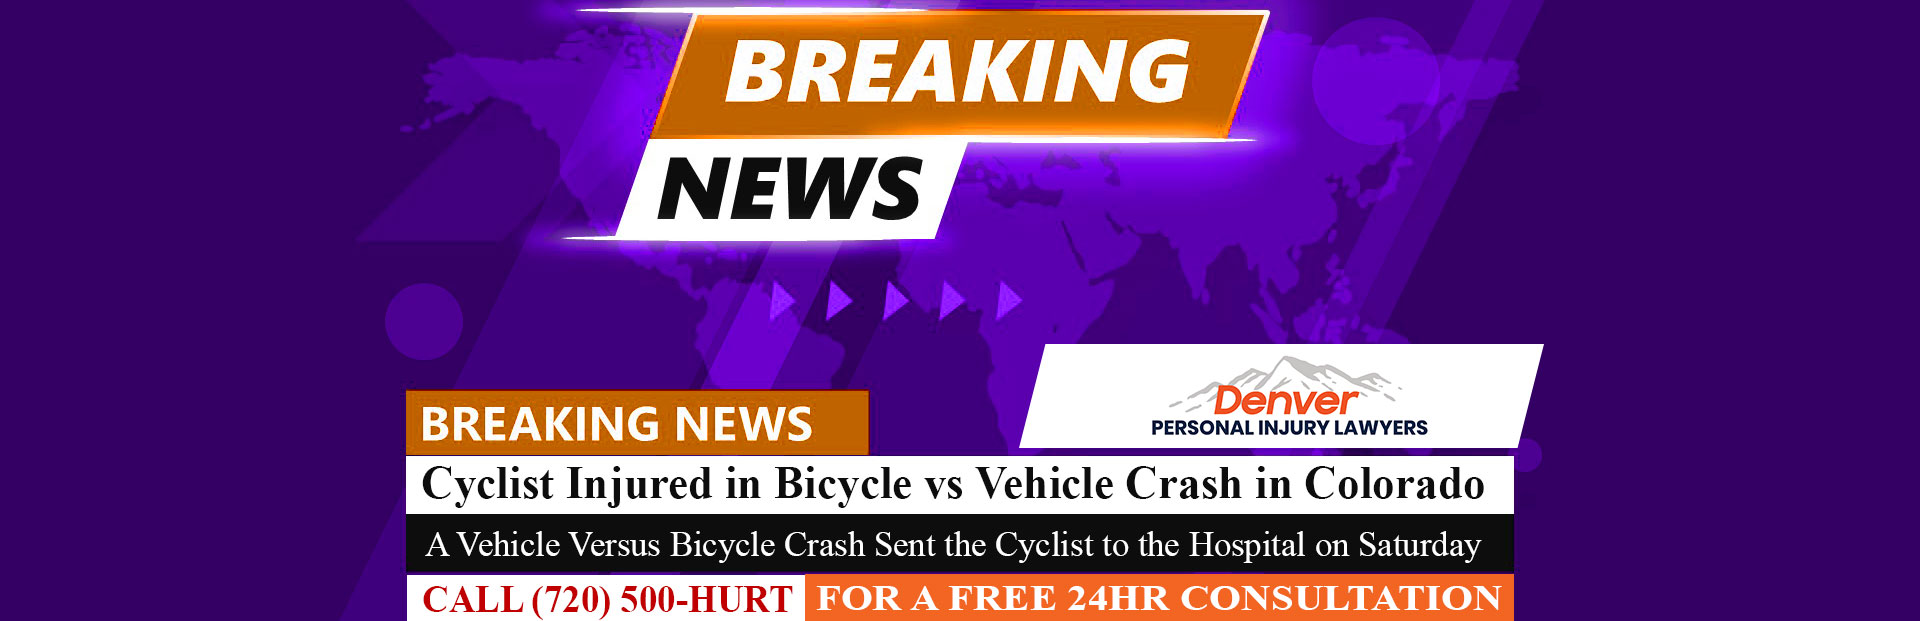 [07-17-23] Cyclist Injured in Bicycle vs Vehicle Crash in Colorado